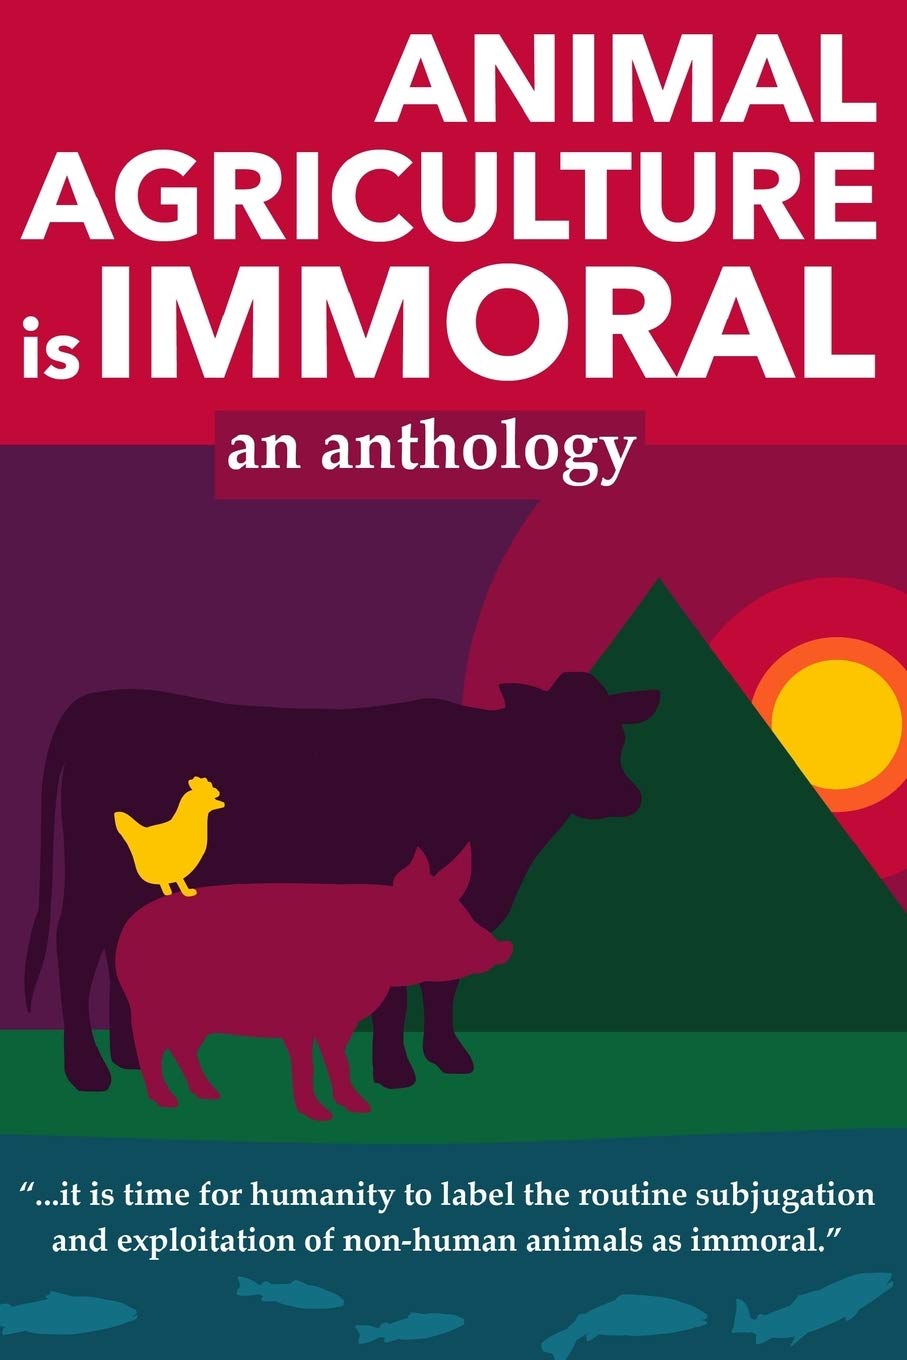 ANIMAL AGRICULTURE is IMMORAL: an anthology